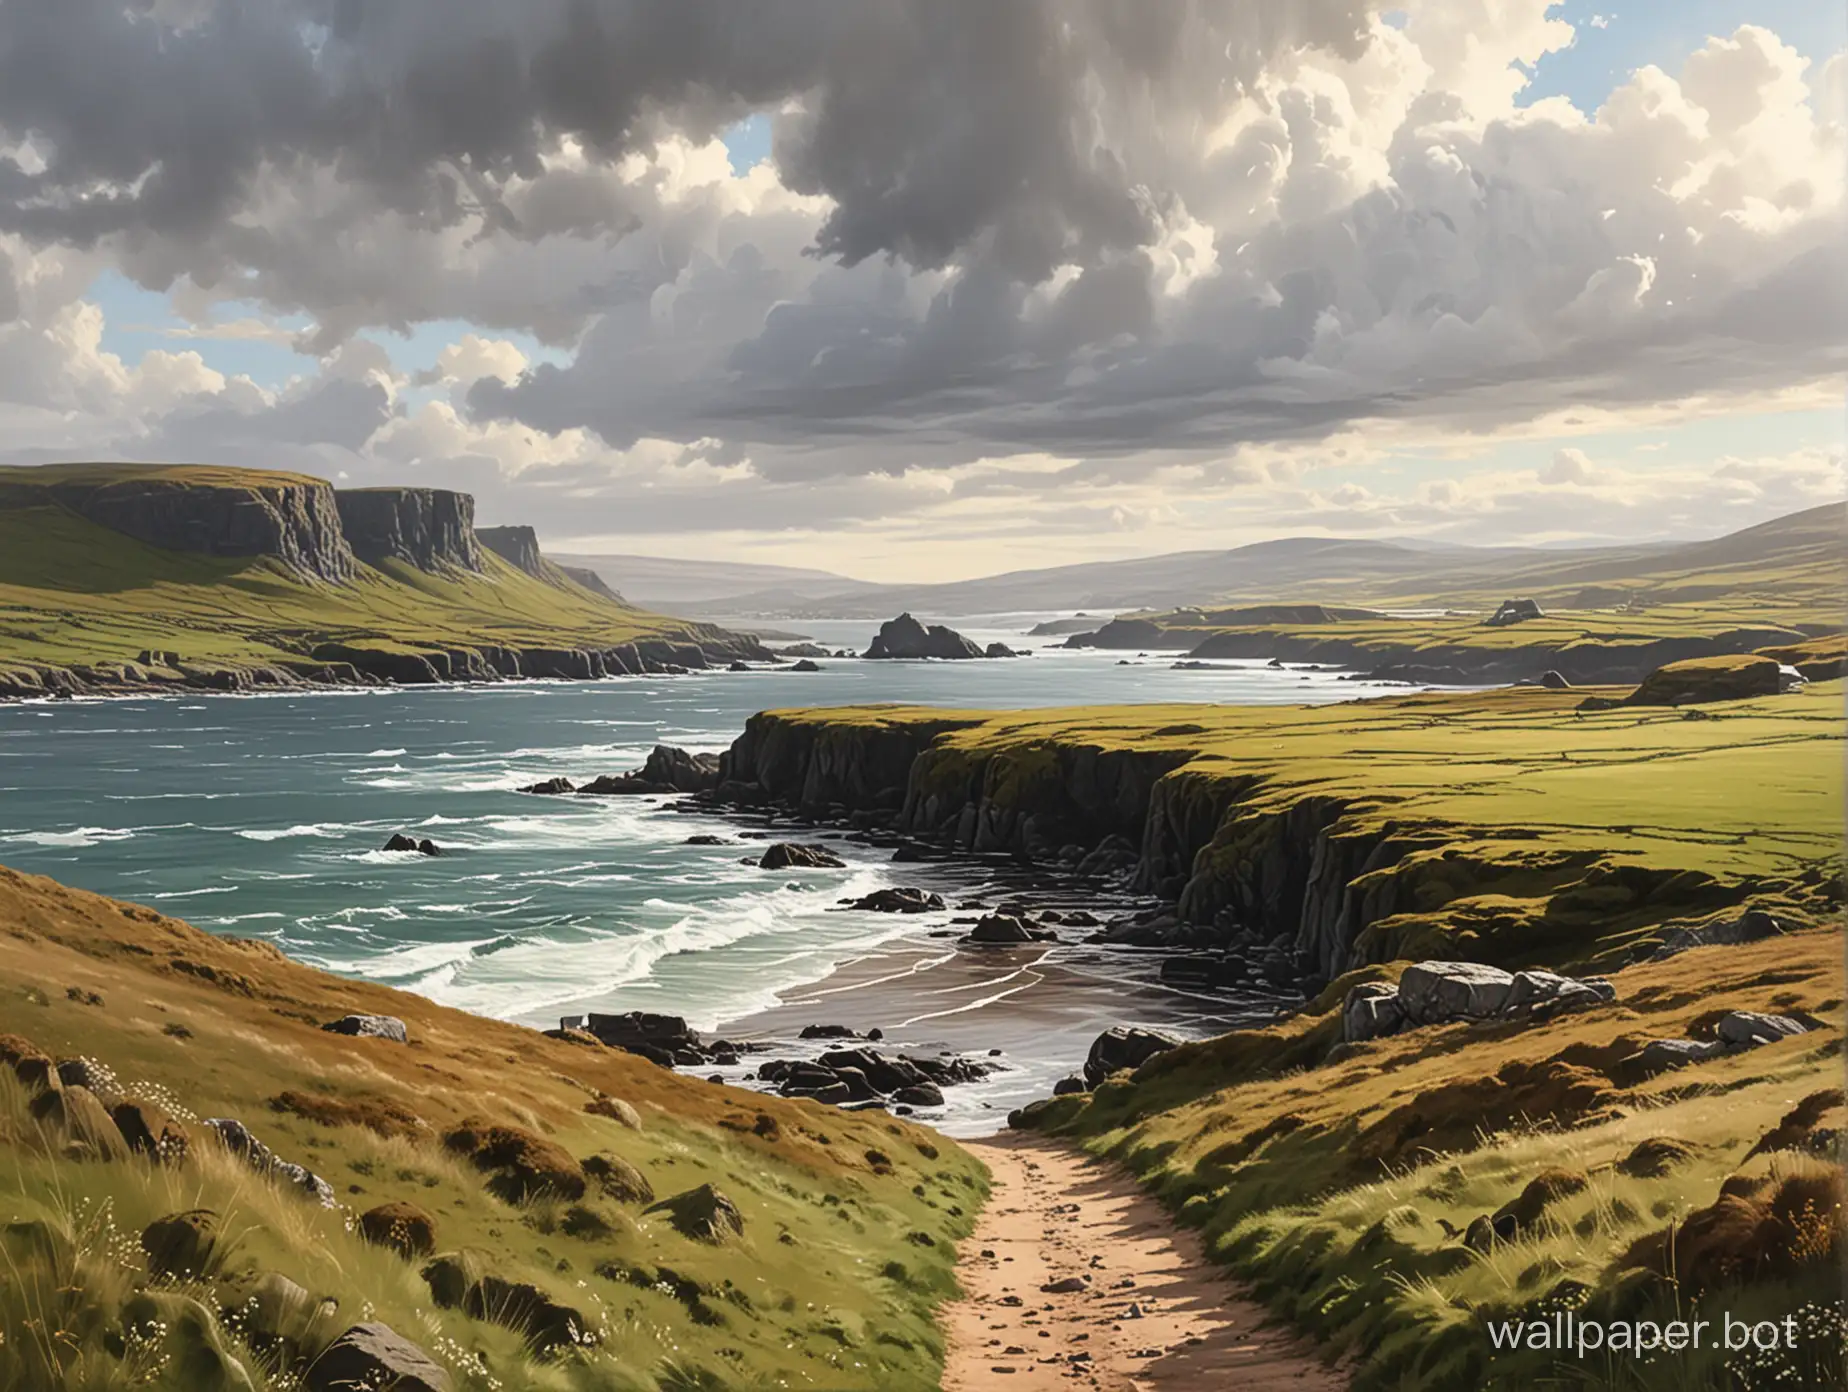 Draw a clean high quality Irish landscape in an artistic way with a thick paint brush